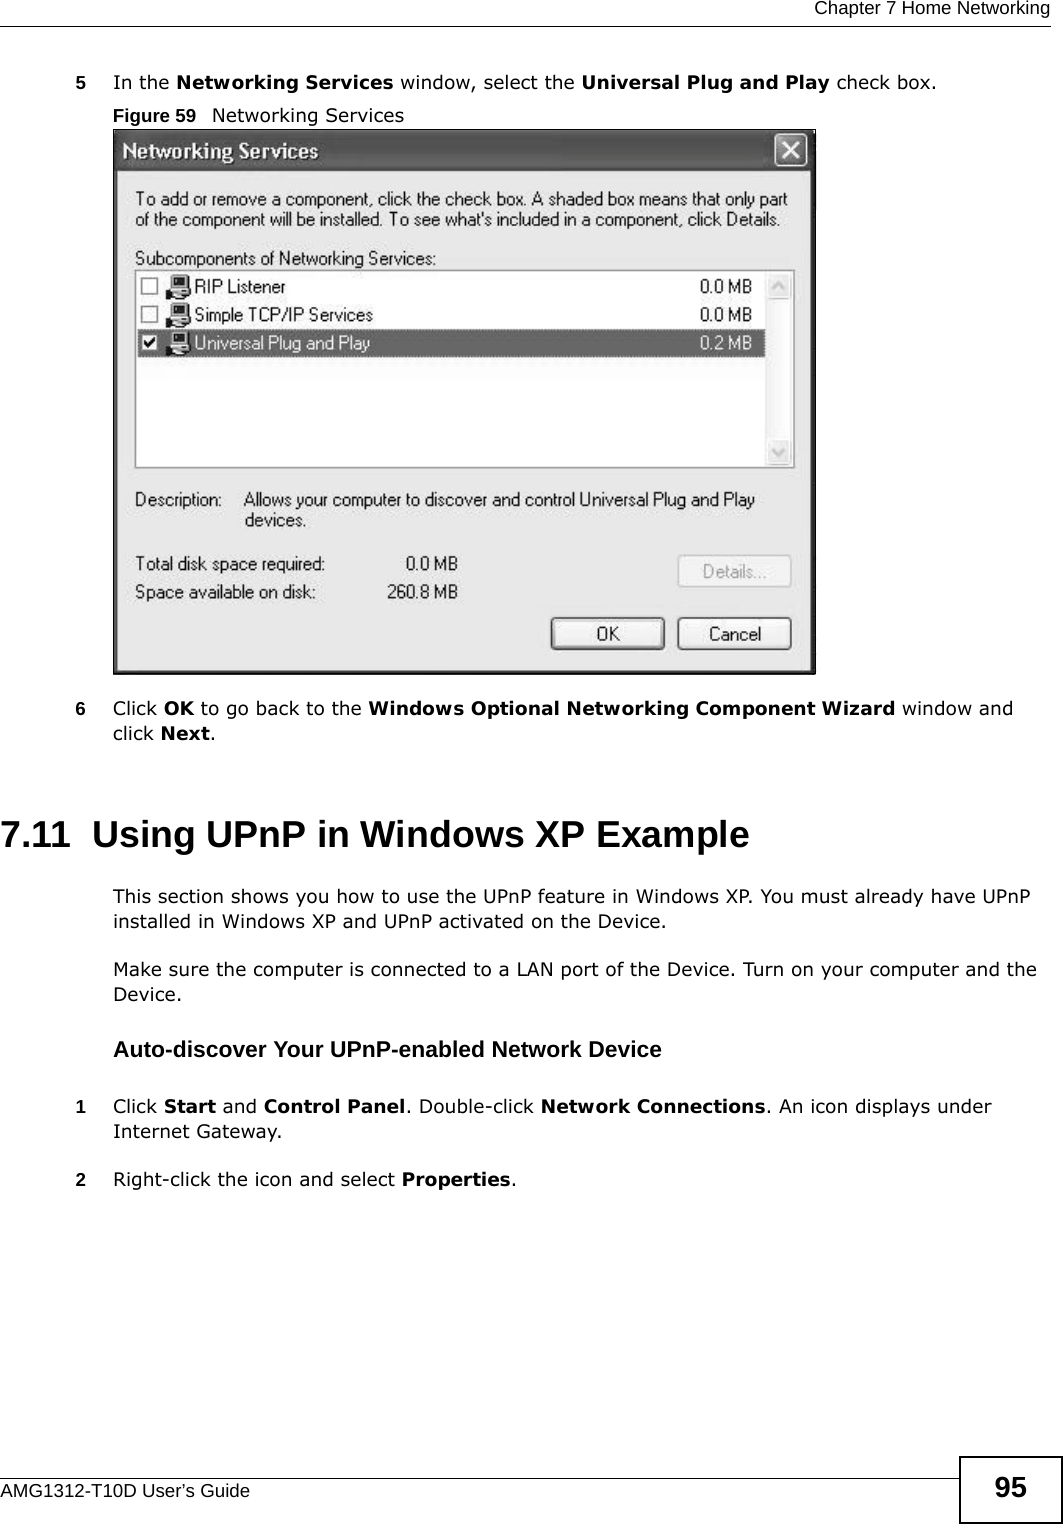  Chapter 7 Home NetworkingAMG1312-T10D User’s Guide 955In the Networking Services window, select the Universal Plug and Play check box. Figure 59   Networking Services6Click OK to go back to the Windows Optional Networking Component Wizard window and click Next. 7.11  Using UPnP in Windows XP ExampleThis section shows you how to use the UPnP feature in Windows XP. You must already have UPnP installed in Windows XP and UPnP activated on the Device.Make sure the computer is connected to a LAN port of the Device. Turn on your computer and the Device. Auto-discover Your UPnP-enabled Network Device1Click Start and Control Panel. Double-click Network Connections. An icon displays under Internet Gateway.2Right-click the icon and select Properties. 